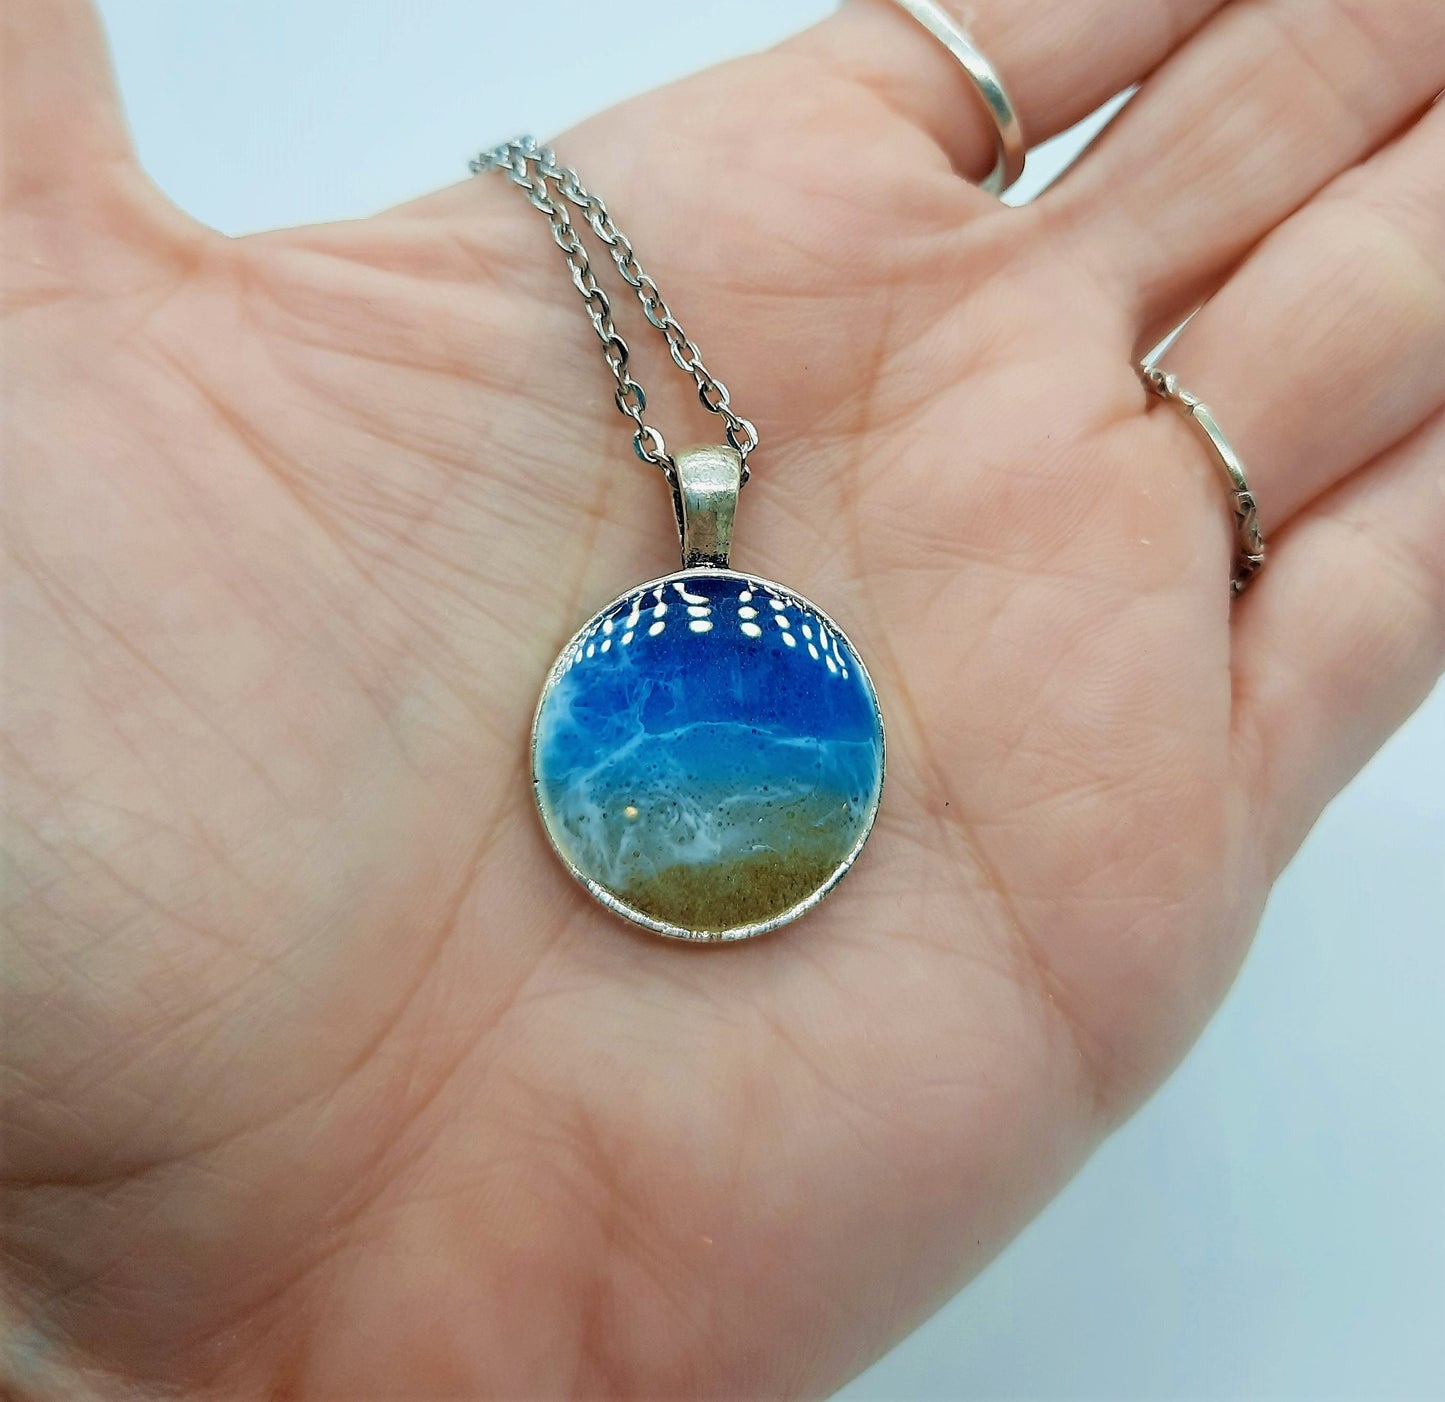 Resin Waves Medium Round Shaped Ocean Pendant / Beach Scene Necklace, Handmade with Resin & Real Sand - One of a Kind - Not a Photograph!